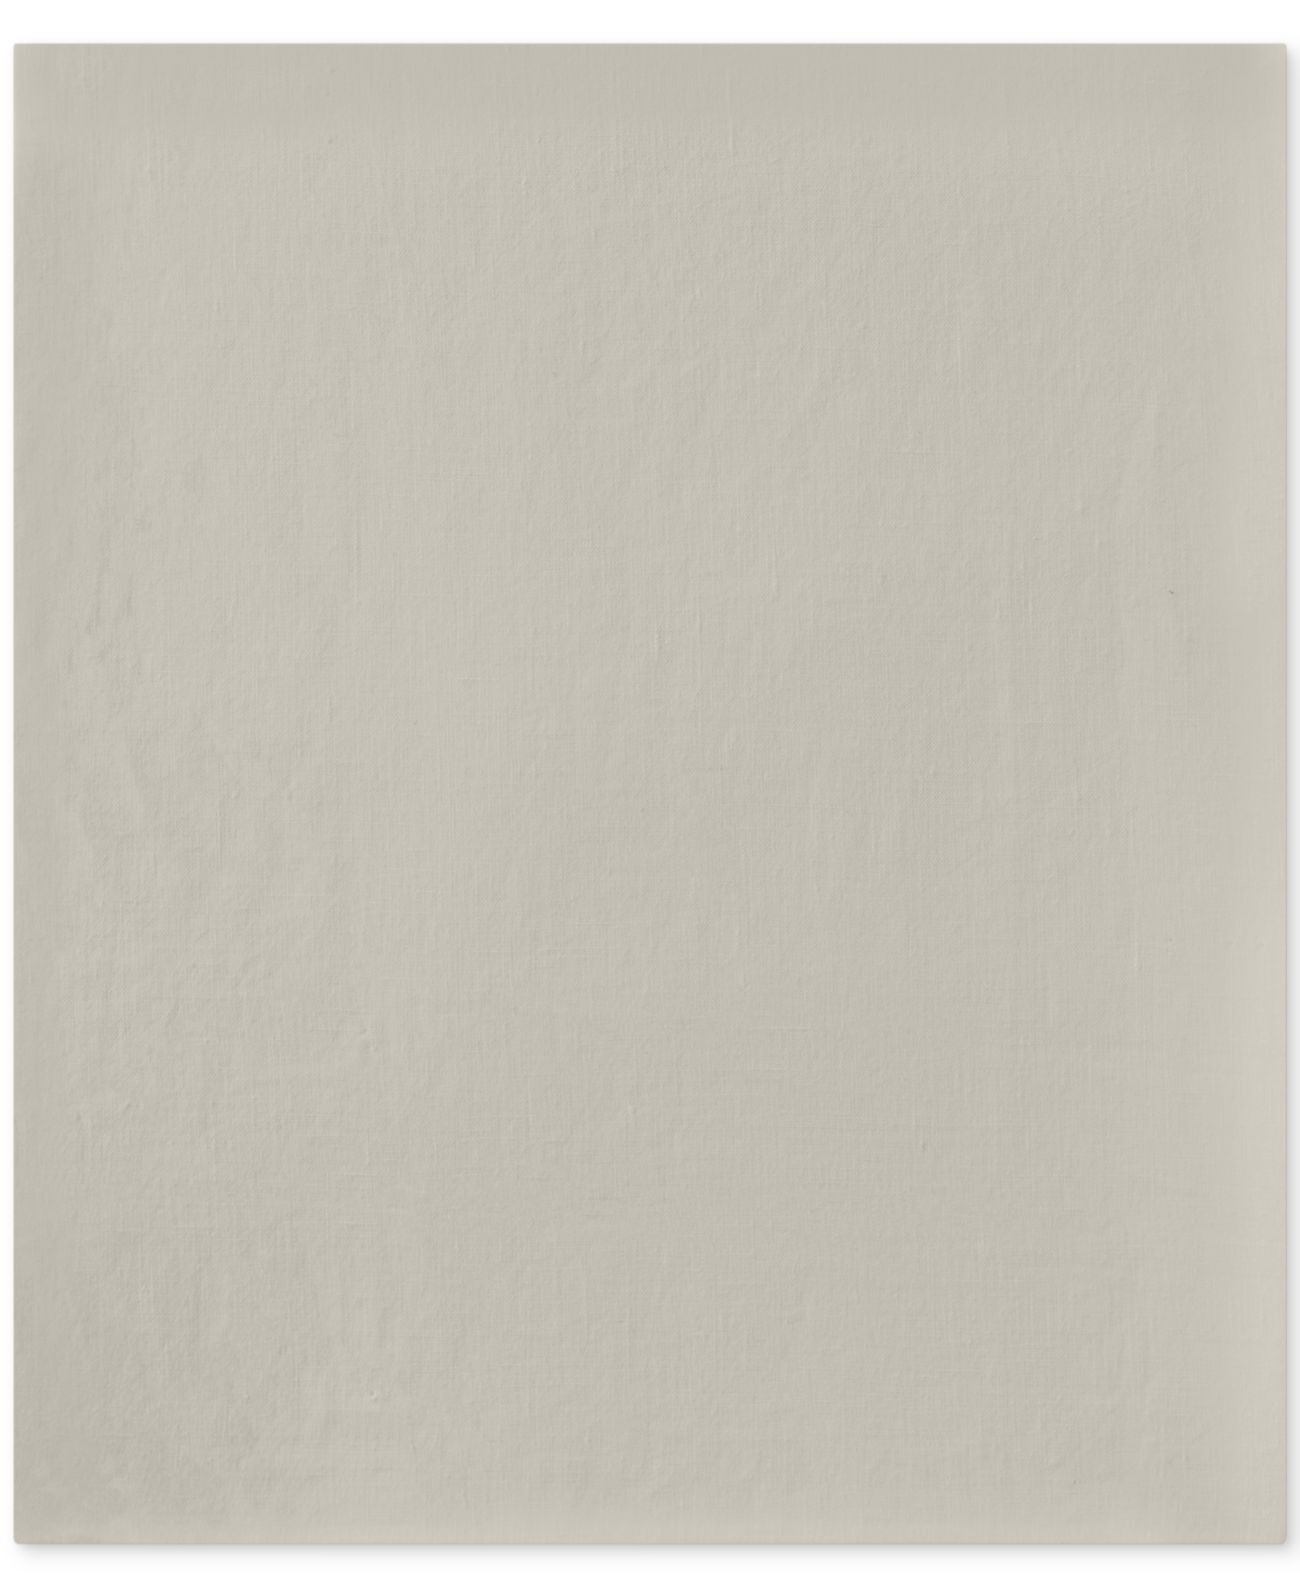 Hotel Collection Piece Dye Fitted Sheet,Lt Beige,California King - $124.73